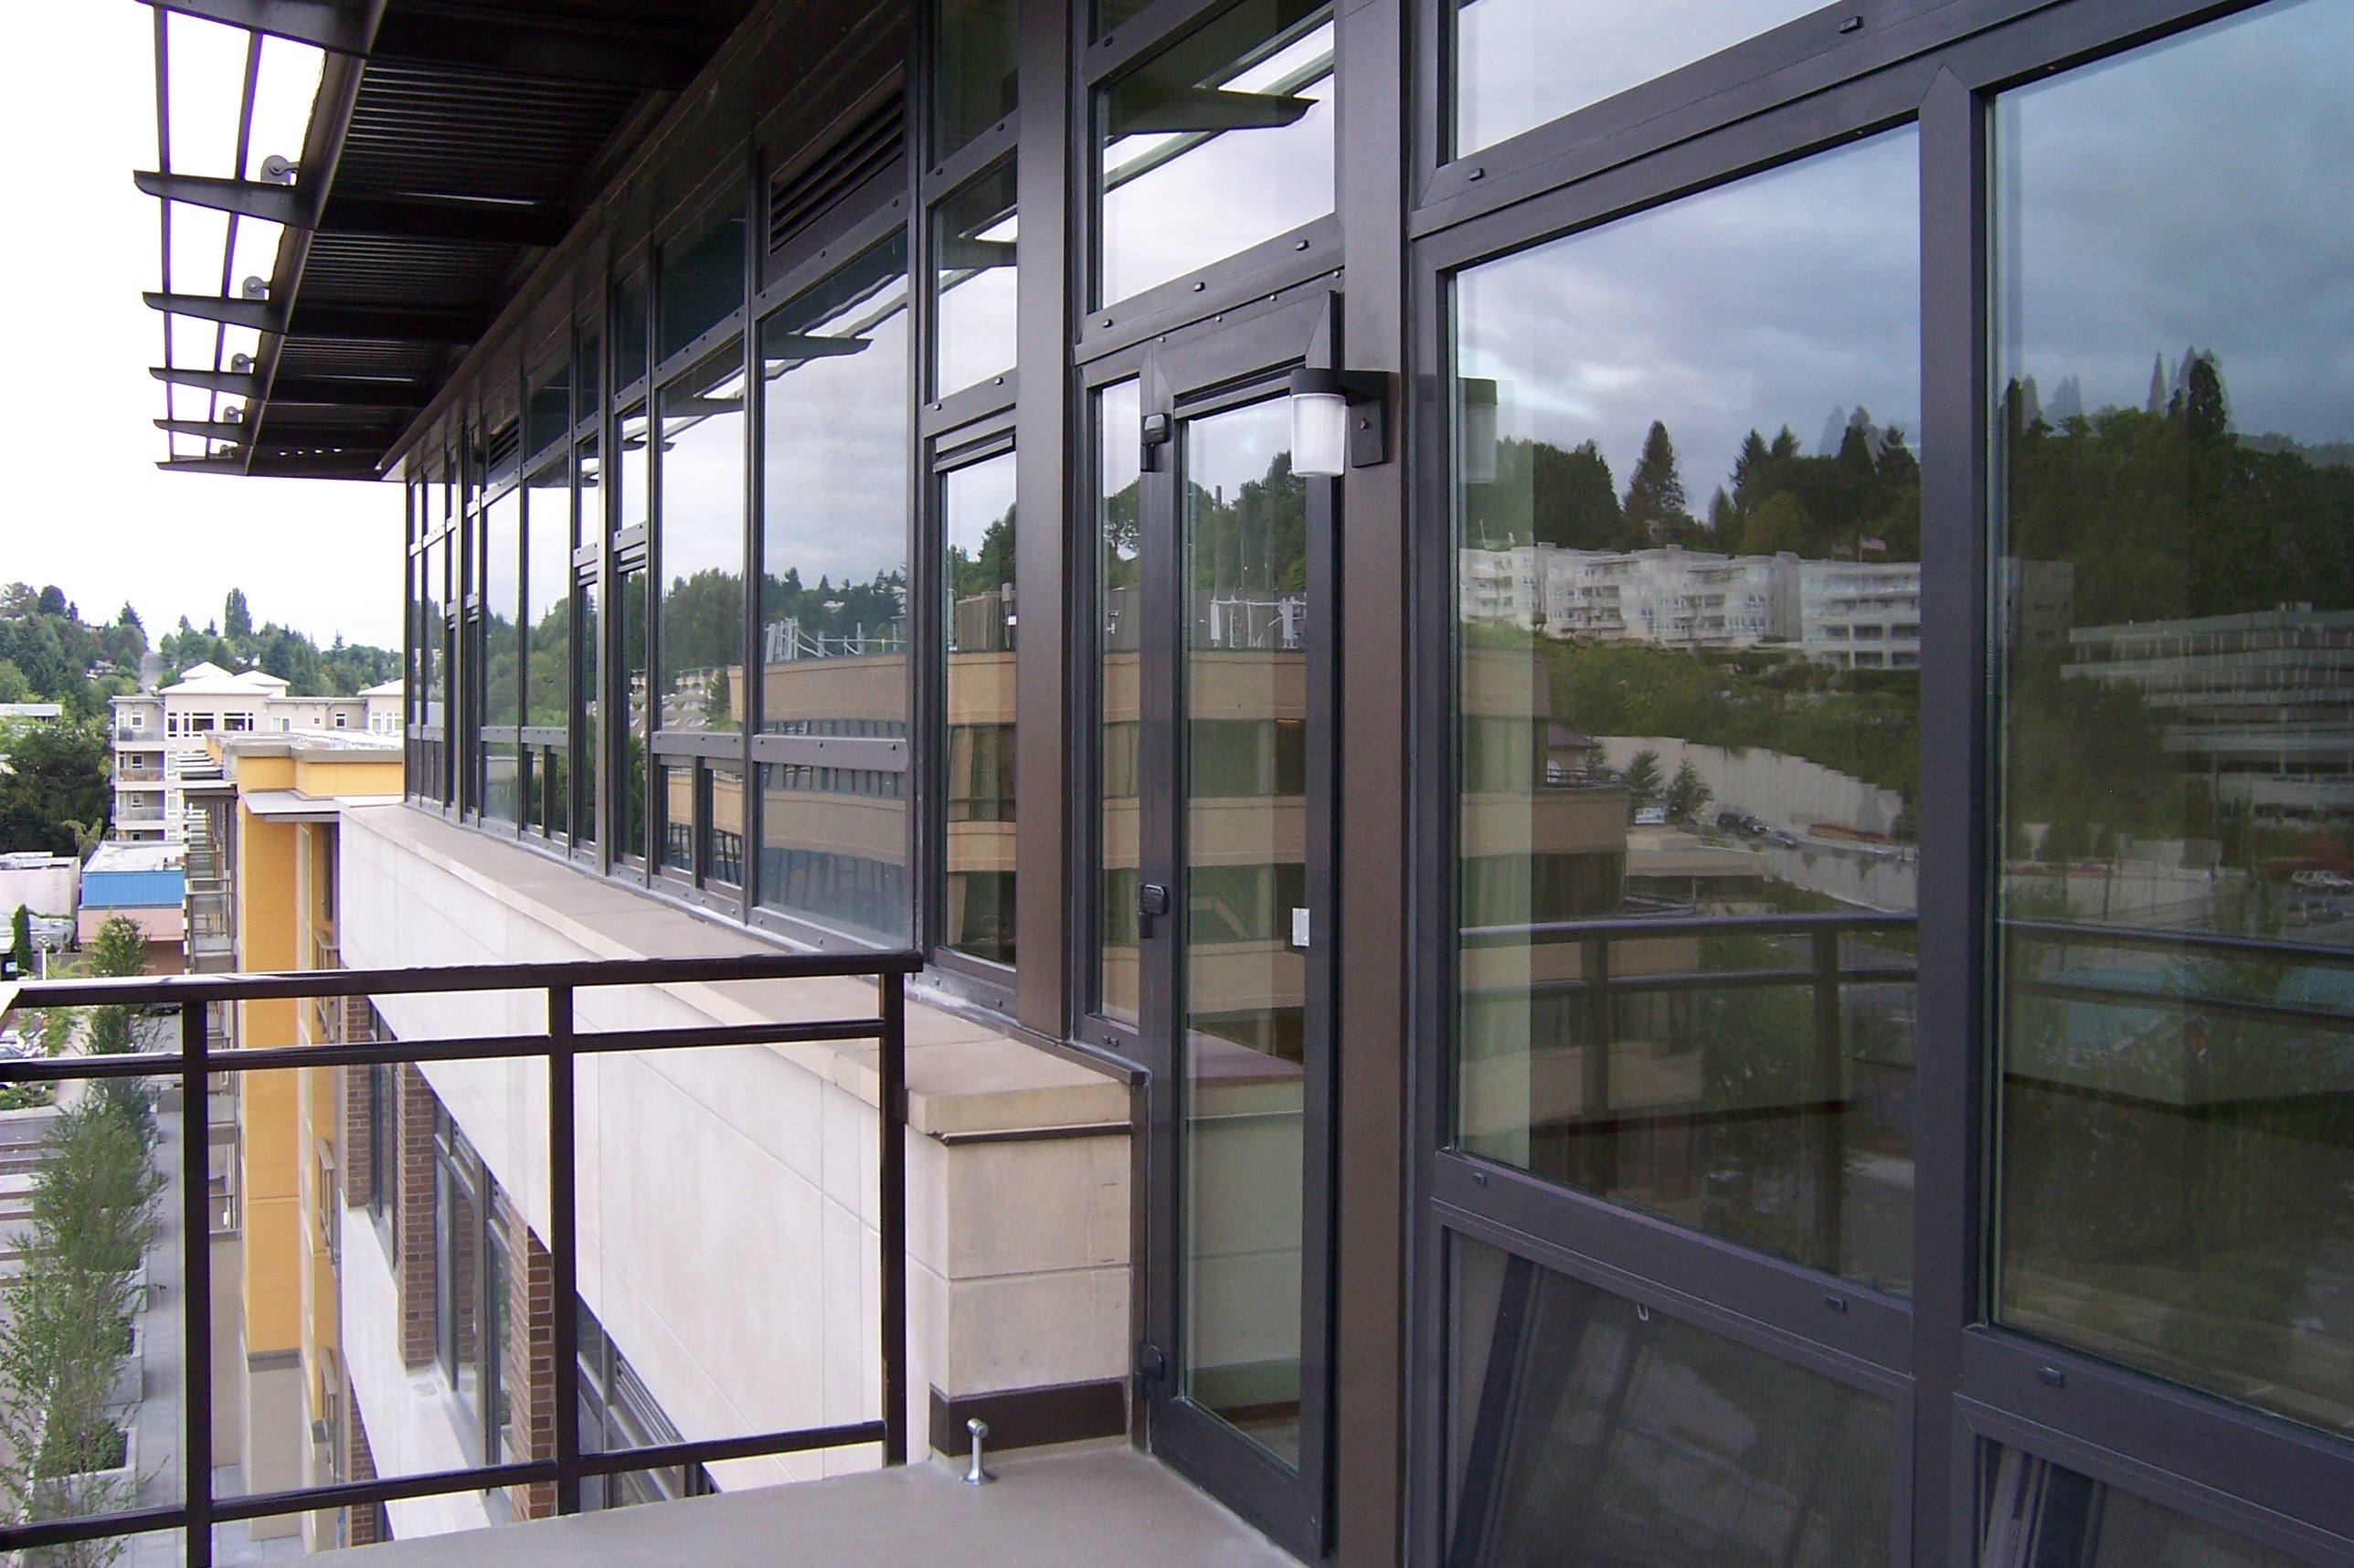 image by Innotech of a commercial glazing system with door